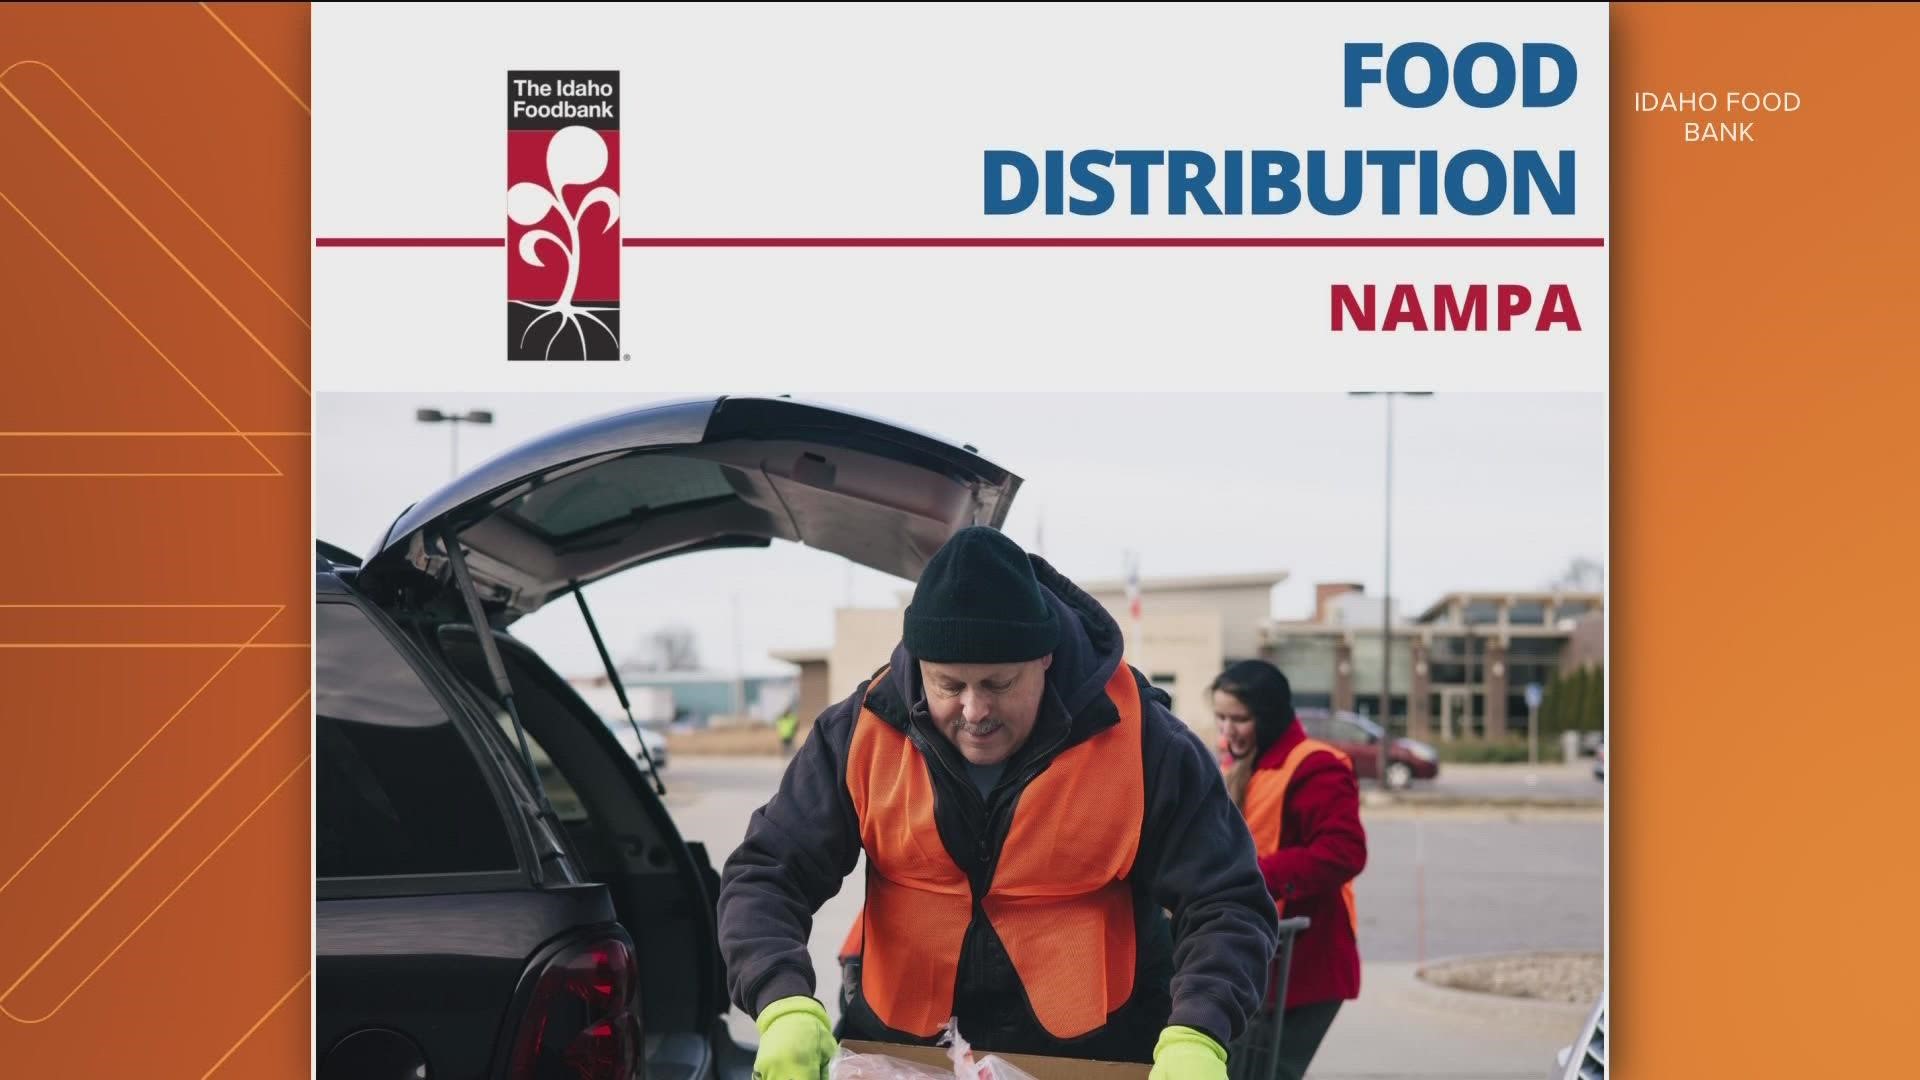 The Idaho Foodbank free food distribution is 11 a.m. to 3 p.m. in the Ford Idaho Center parking lot. If you need food, just show up.